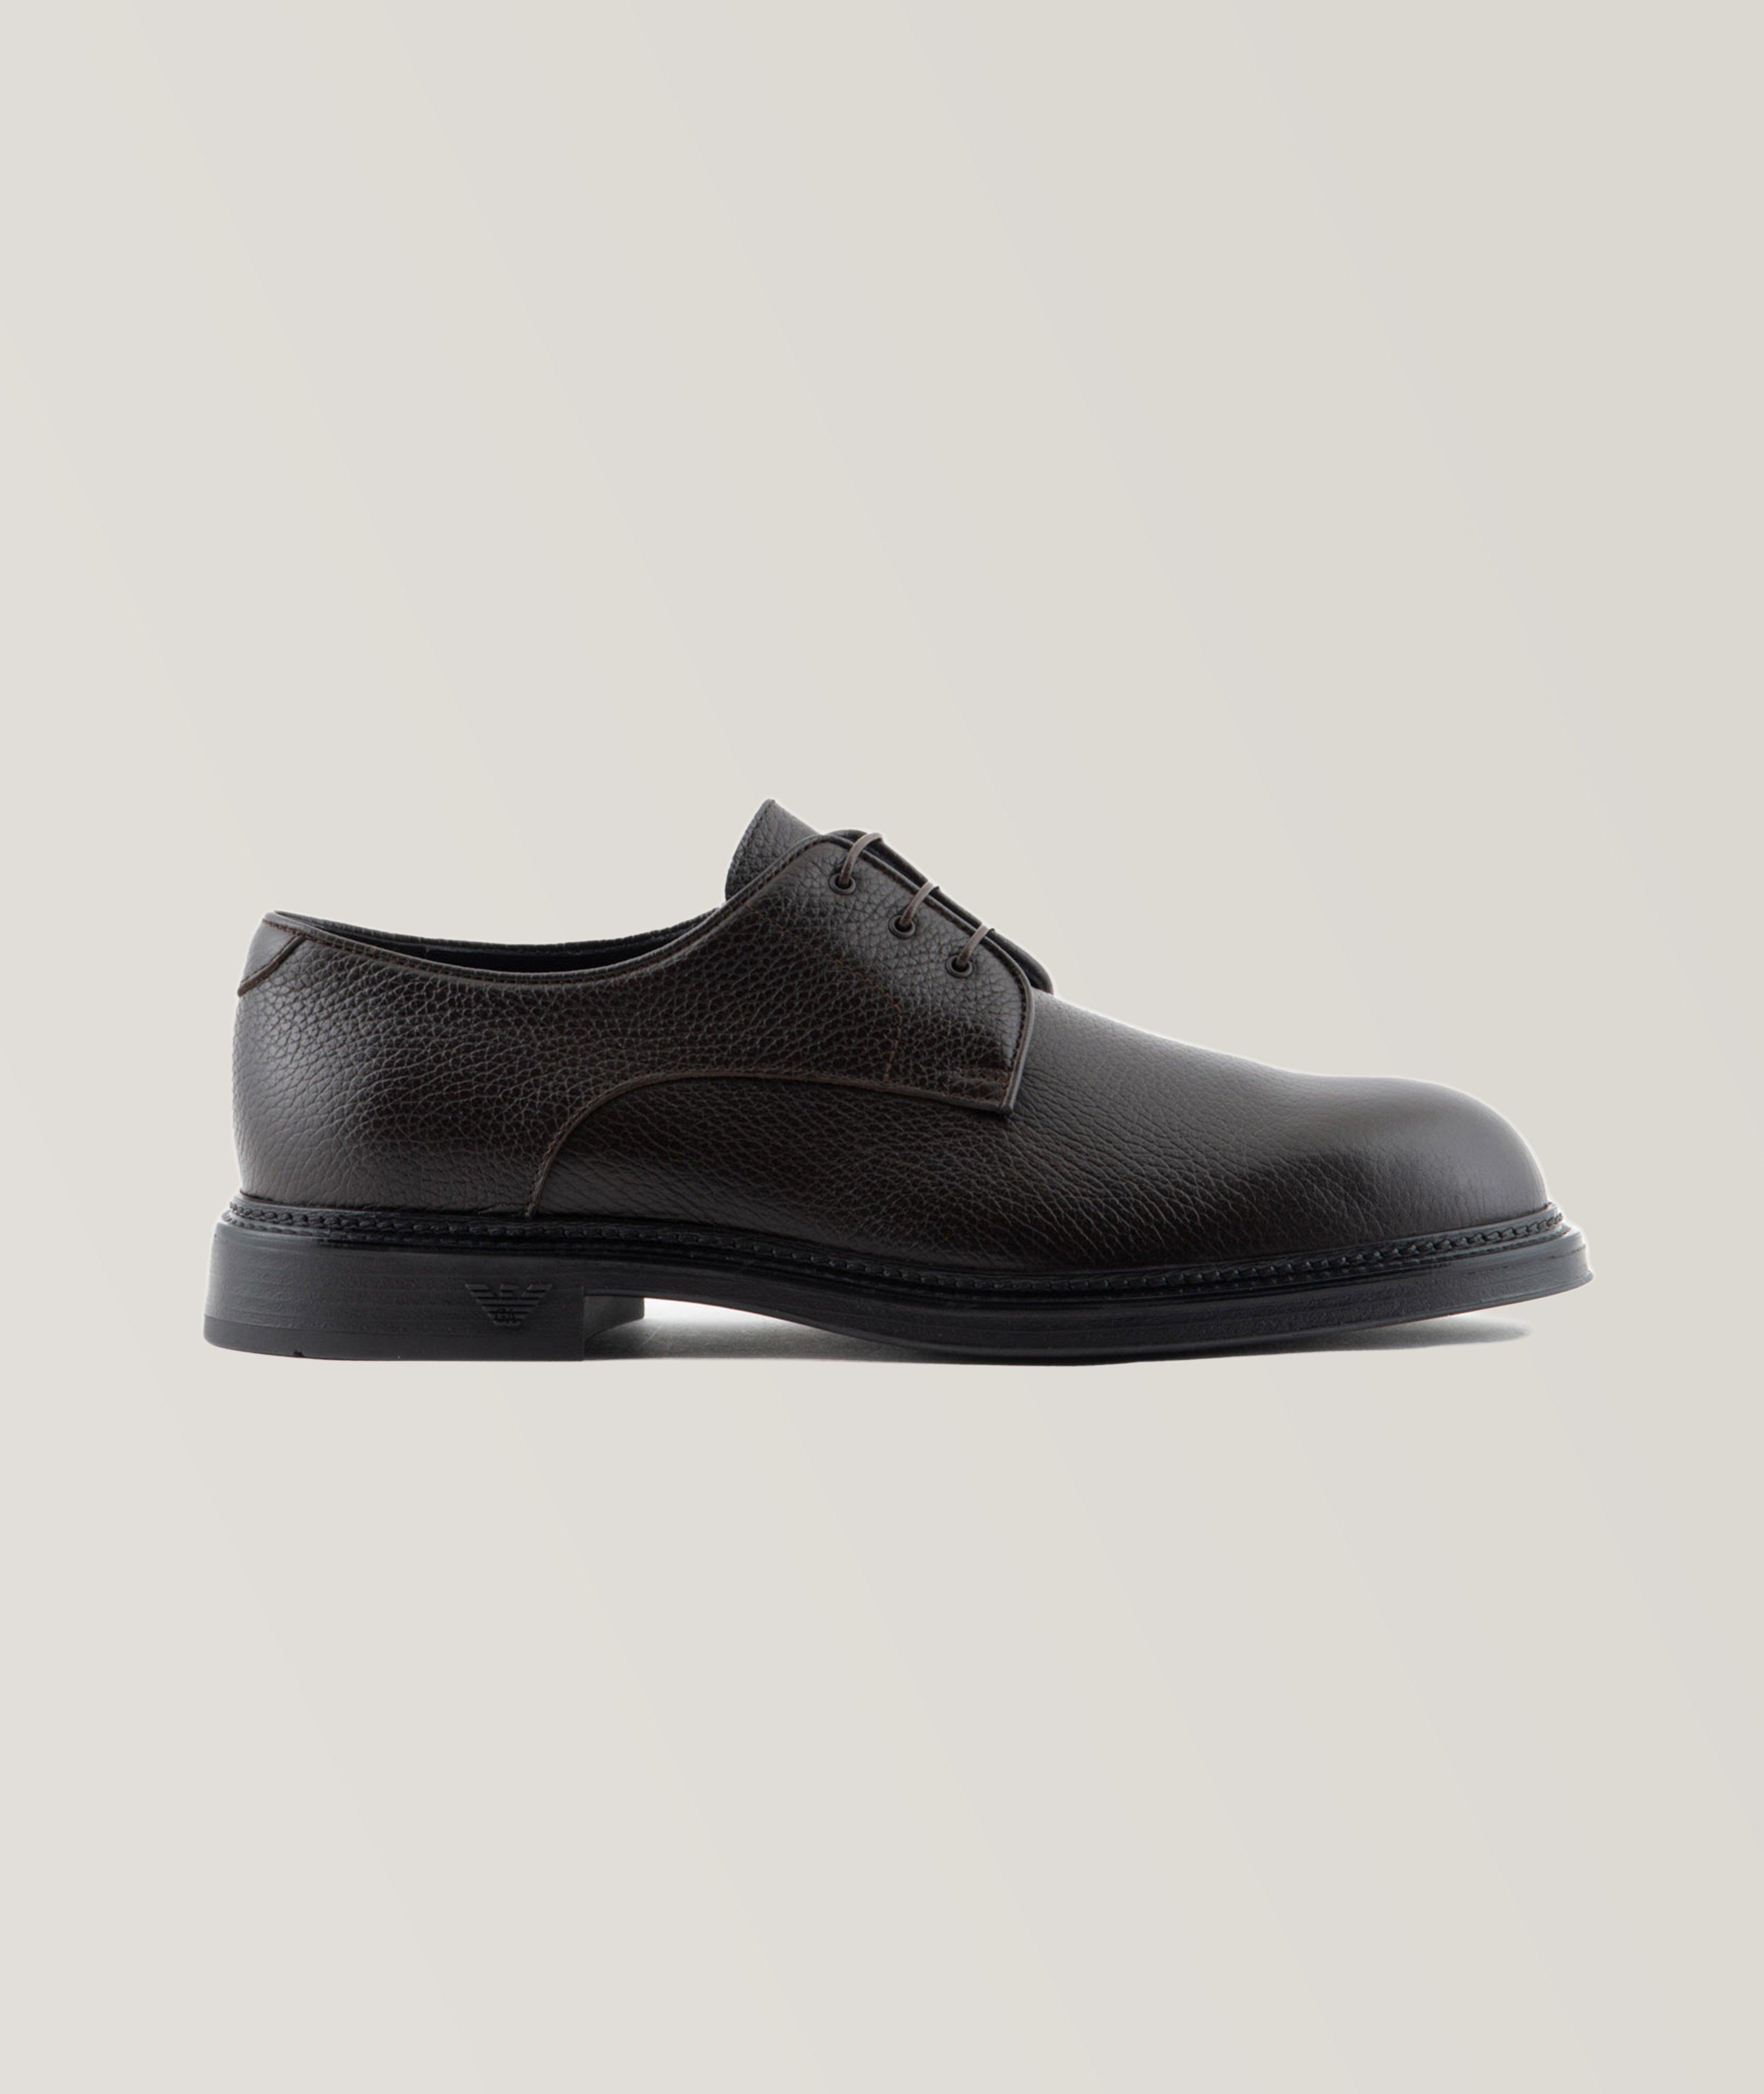 Grained Calfskin Leather Derbies image 0